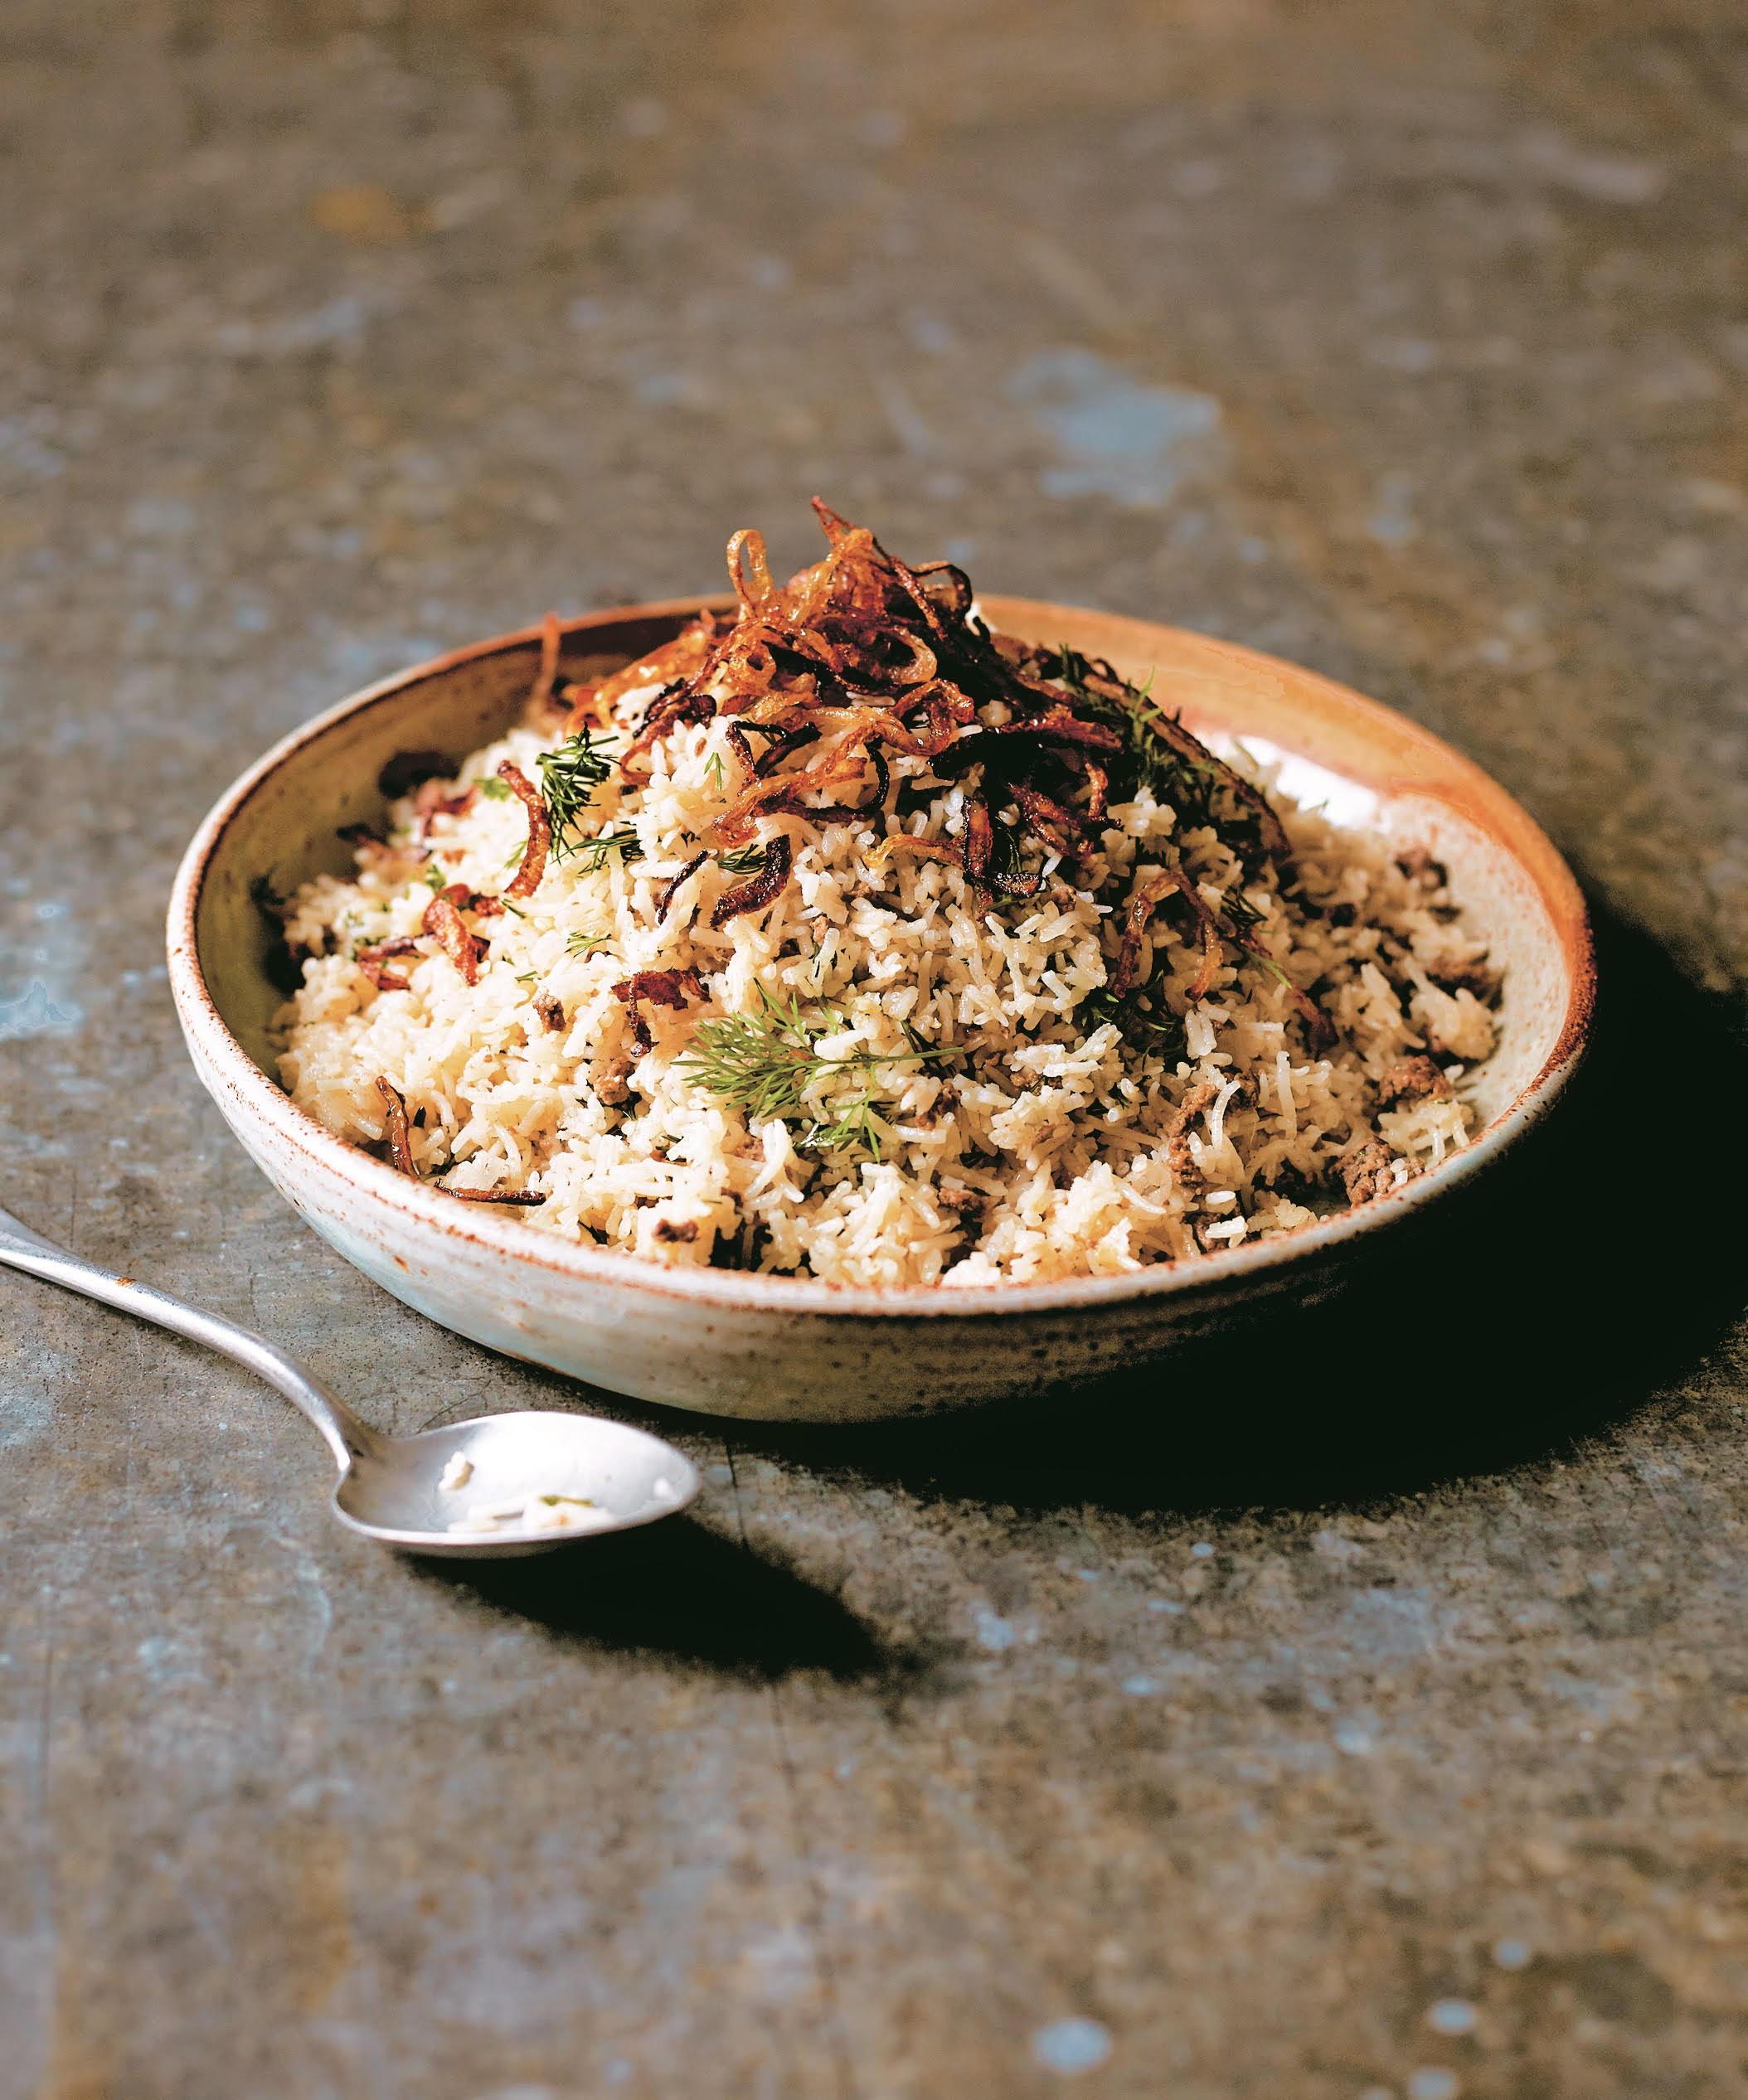 Keema sau pulao is the perfect sharing dish, especially if you are planning to eat outdoors